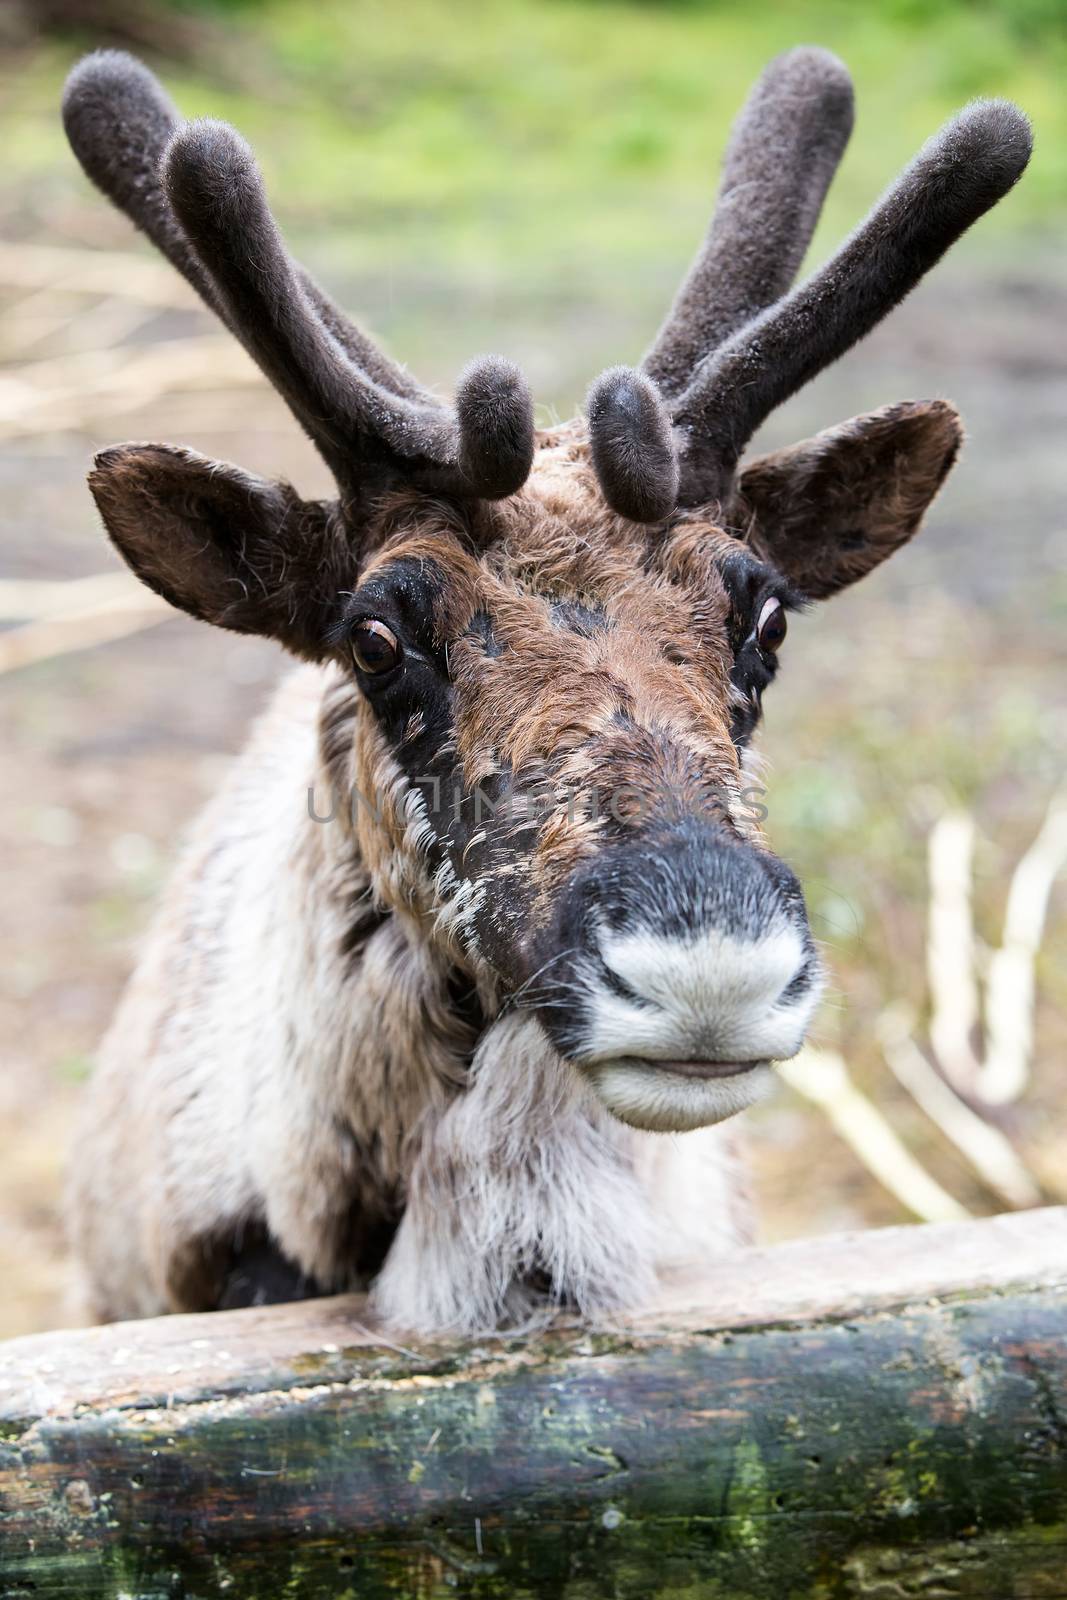 Molting reindeer with full velvet covering antlers looking over fence